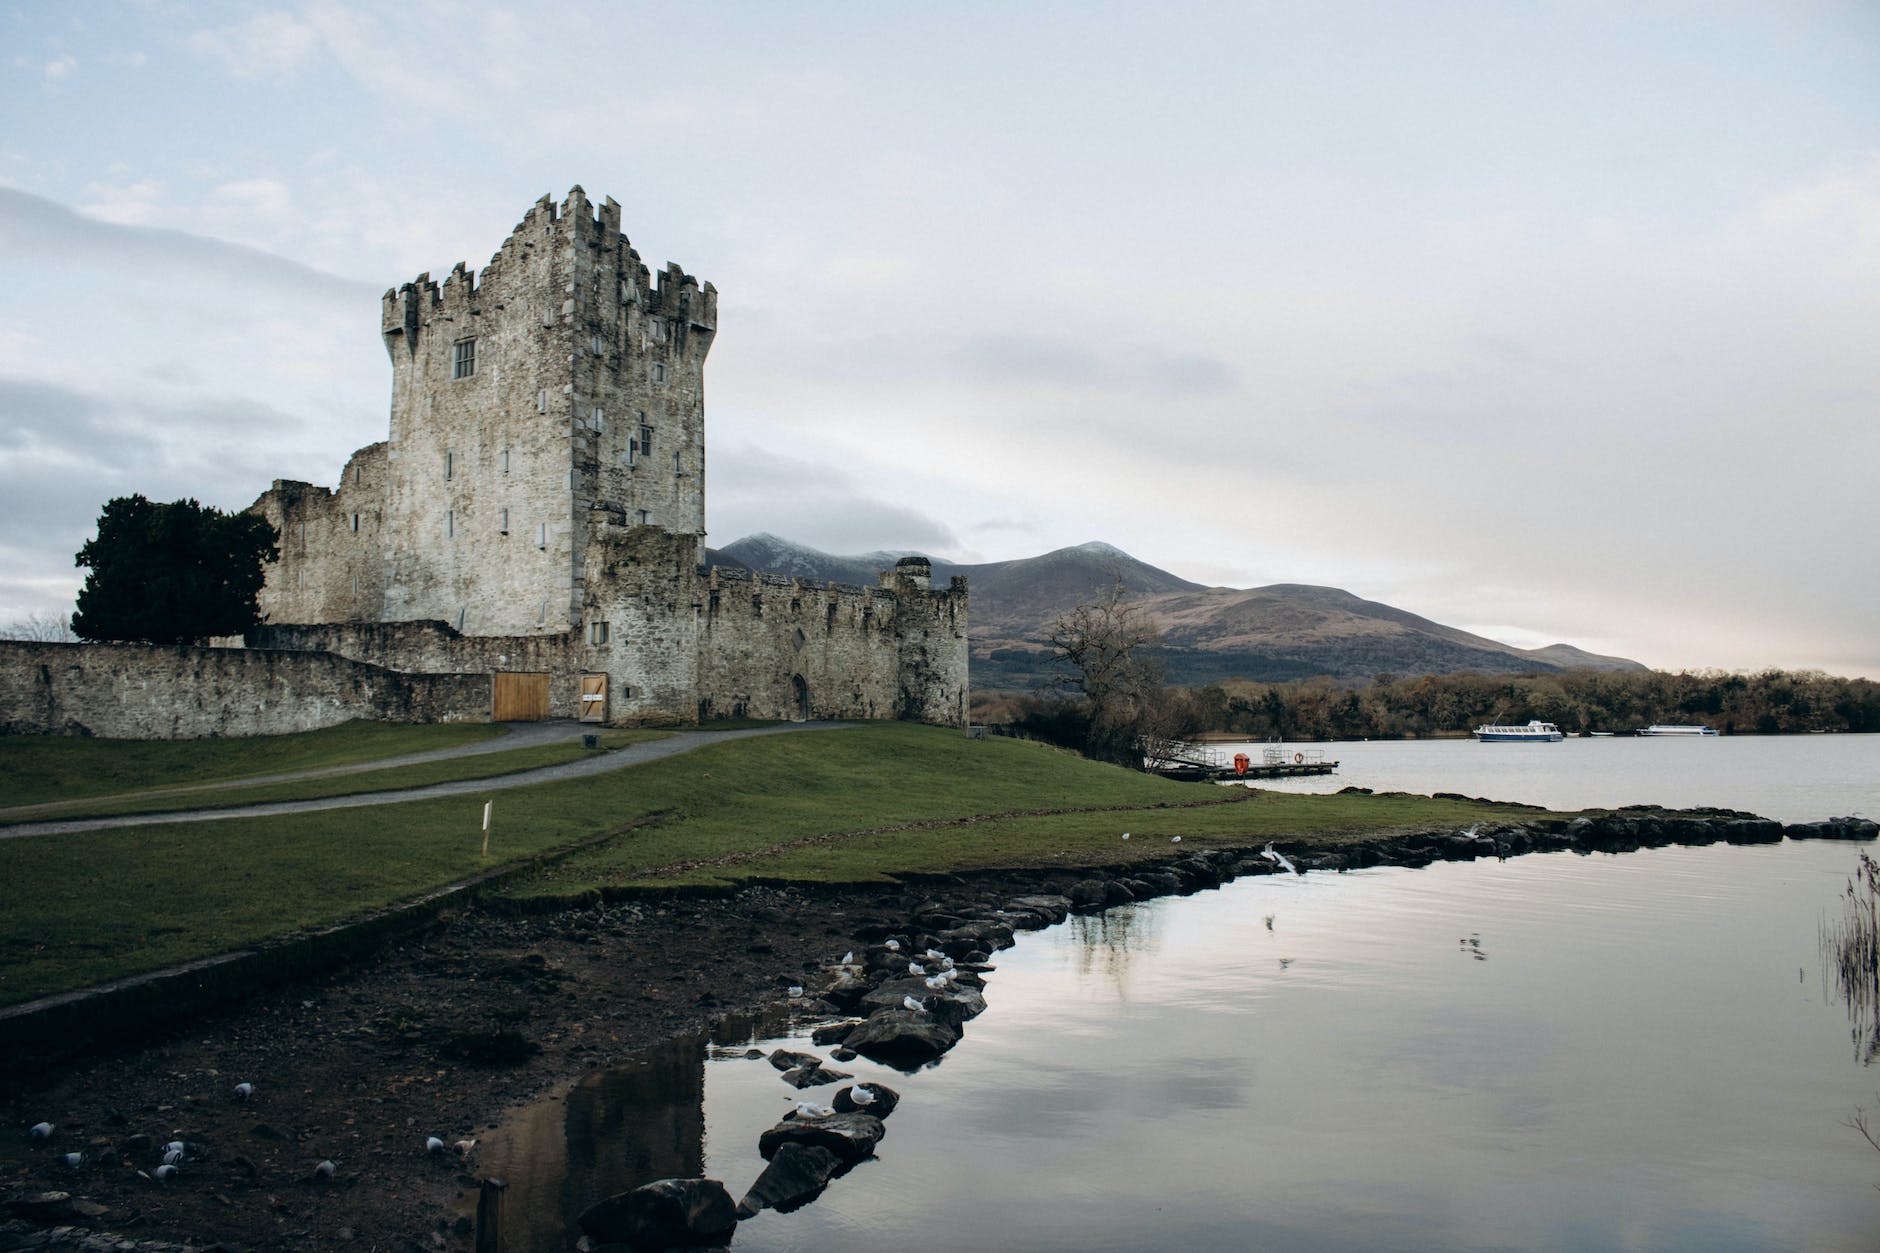 view of the ross castle by the lough leane in killarney national park county kerry ireland